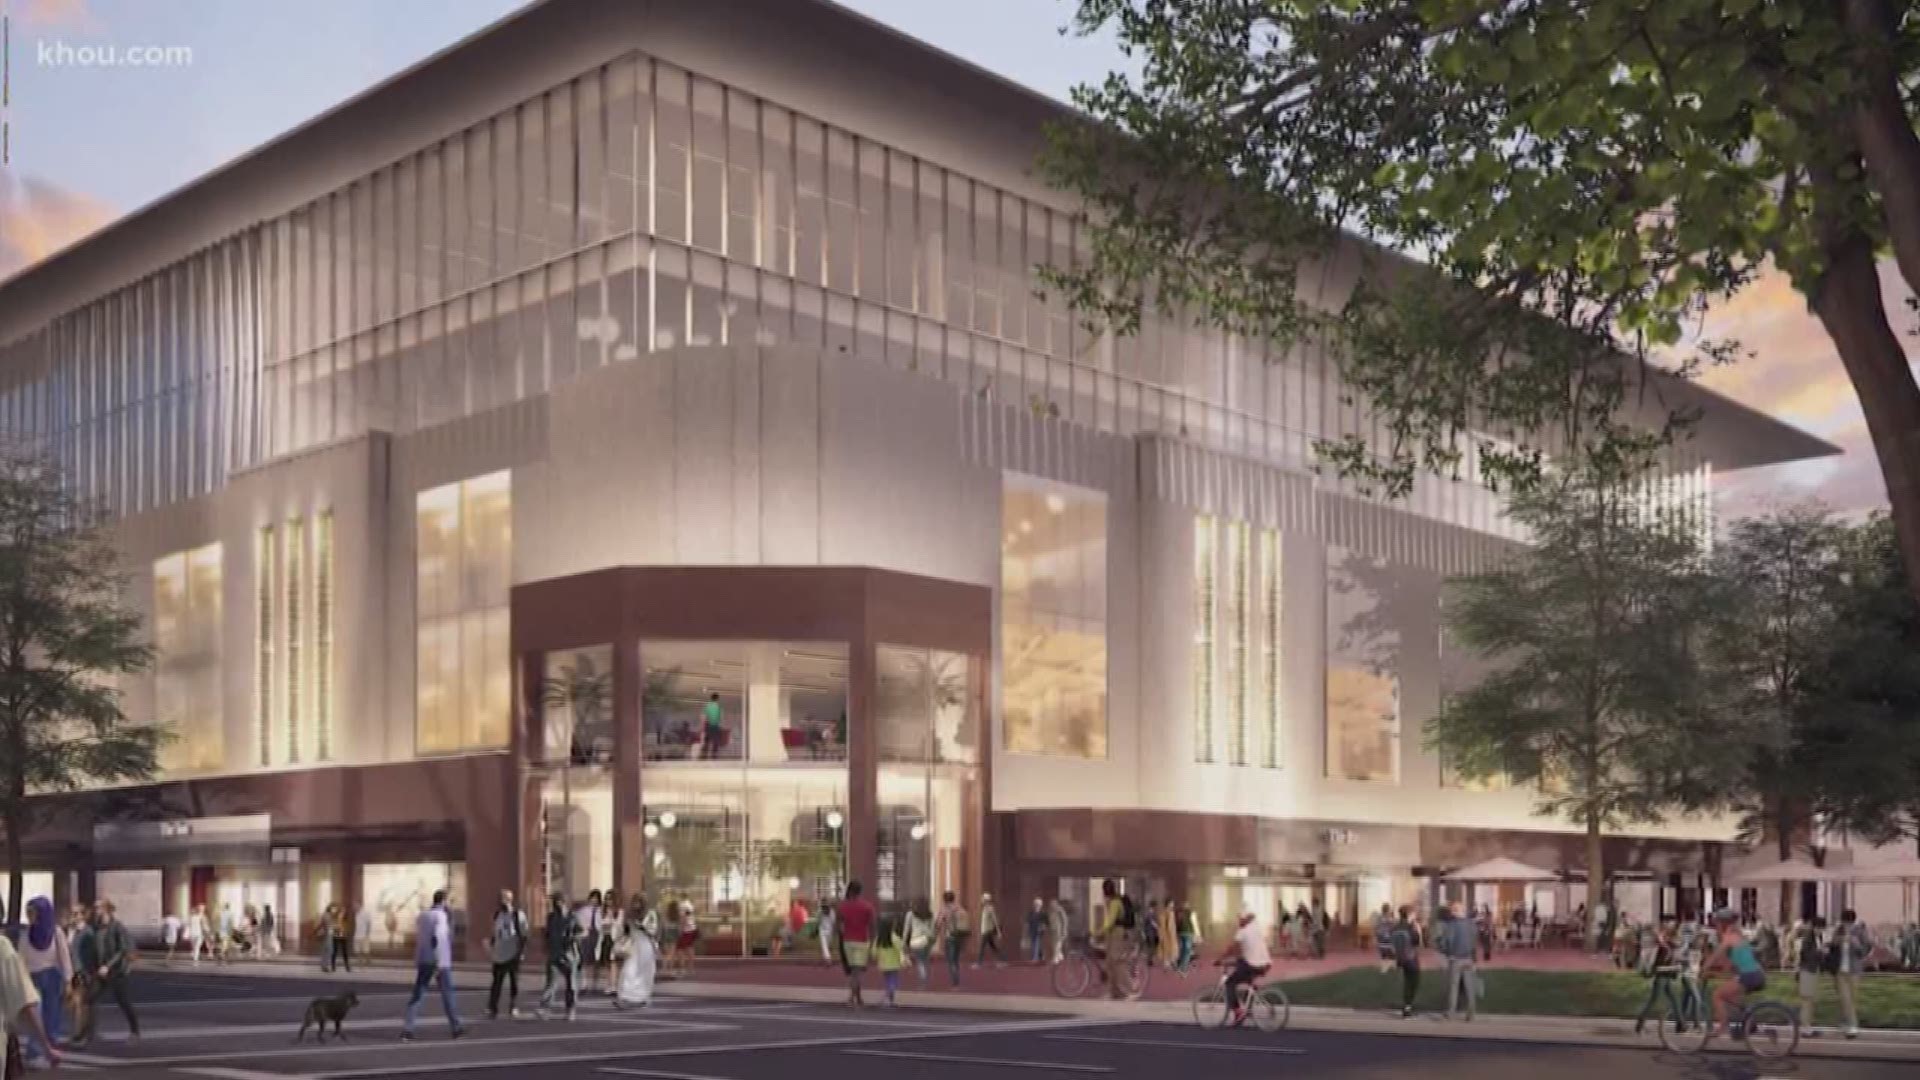 Rice University says the transformation begins in May. The old Sears building in midtown will become a space for startup companies in a collaborative innovation district.